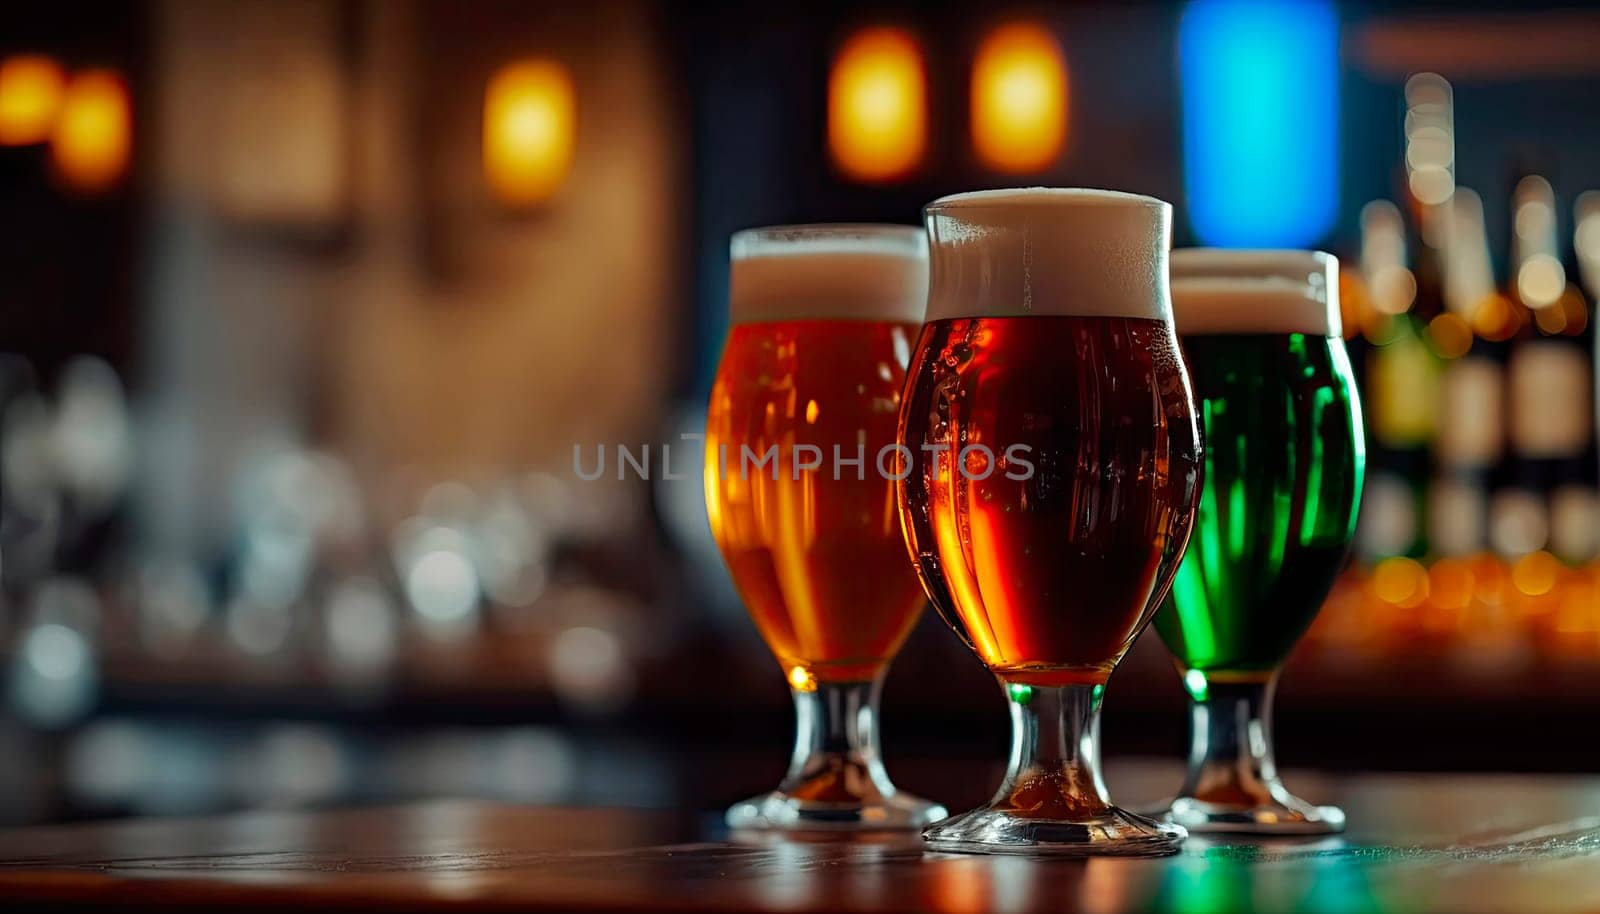 Draft beer in glasses on the bar in a row, the background of the bar is blurred. by yanadjana